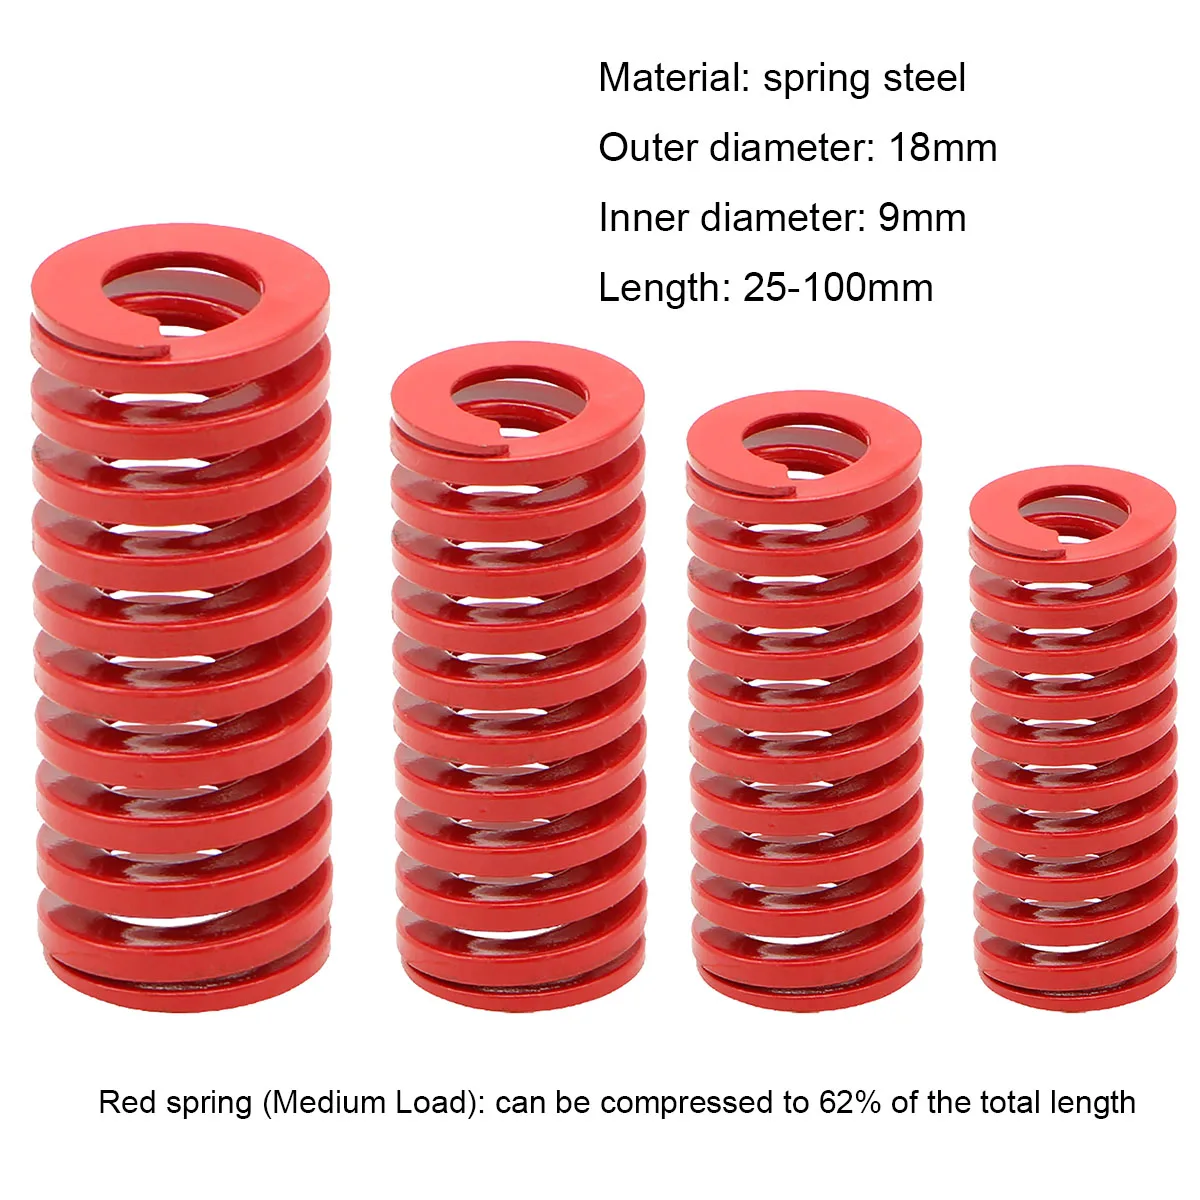 

Red Medium Load Press Compression Spring Loading Die Mold Spring Outer Diameter 18mm x Inner Diameter 9mm x Length 25-100mm